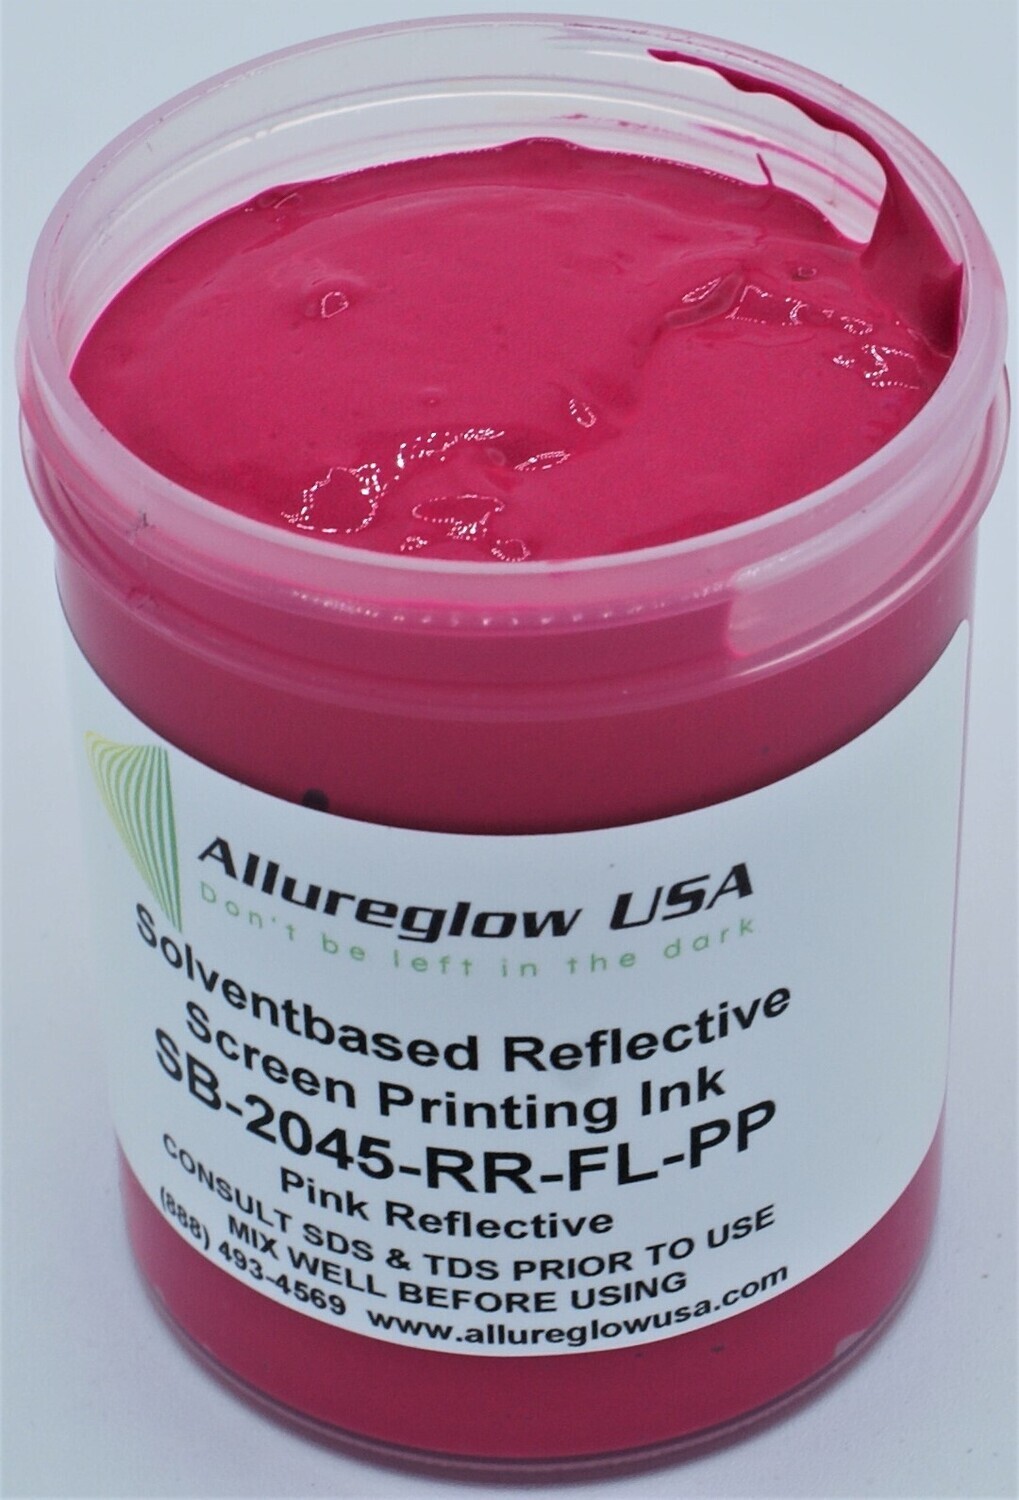 SB-2045-RR-FL-PP-GL   SOLVENT BASED PINK REFLECTIVE SCREEN PRINTING INK -  GALLON